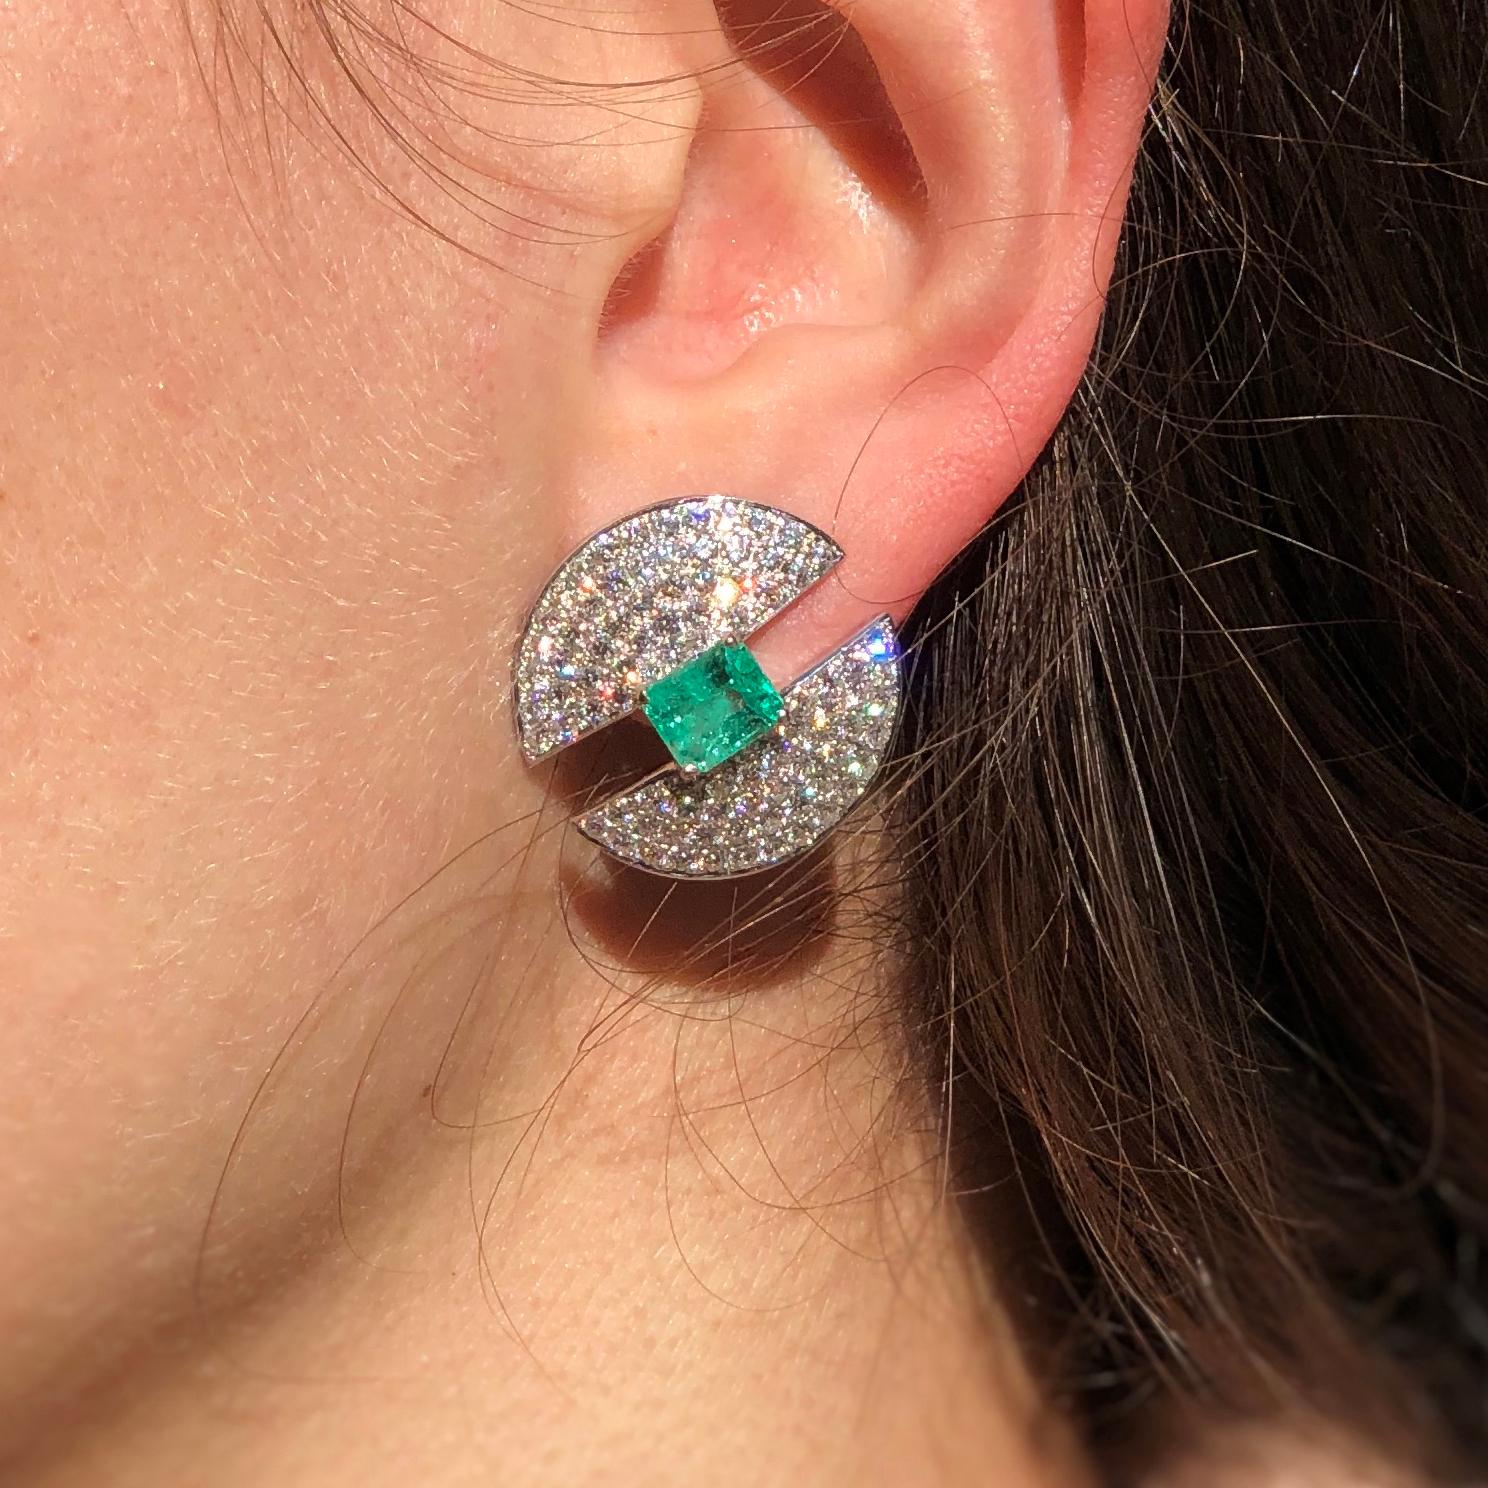 Domed 18kt white gold earrings with two 1.05ct emeralds (2.10cts total) and diamond pavé (3.40ct) from Ralph Masri's Modernist collection, inspired by mid-century Modernist architecture with an emphasis on minimalist shapes and silhouettes.

Push